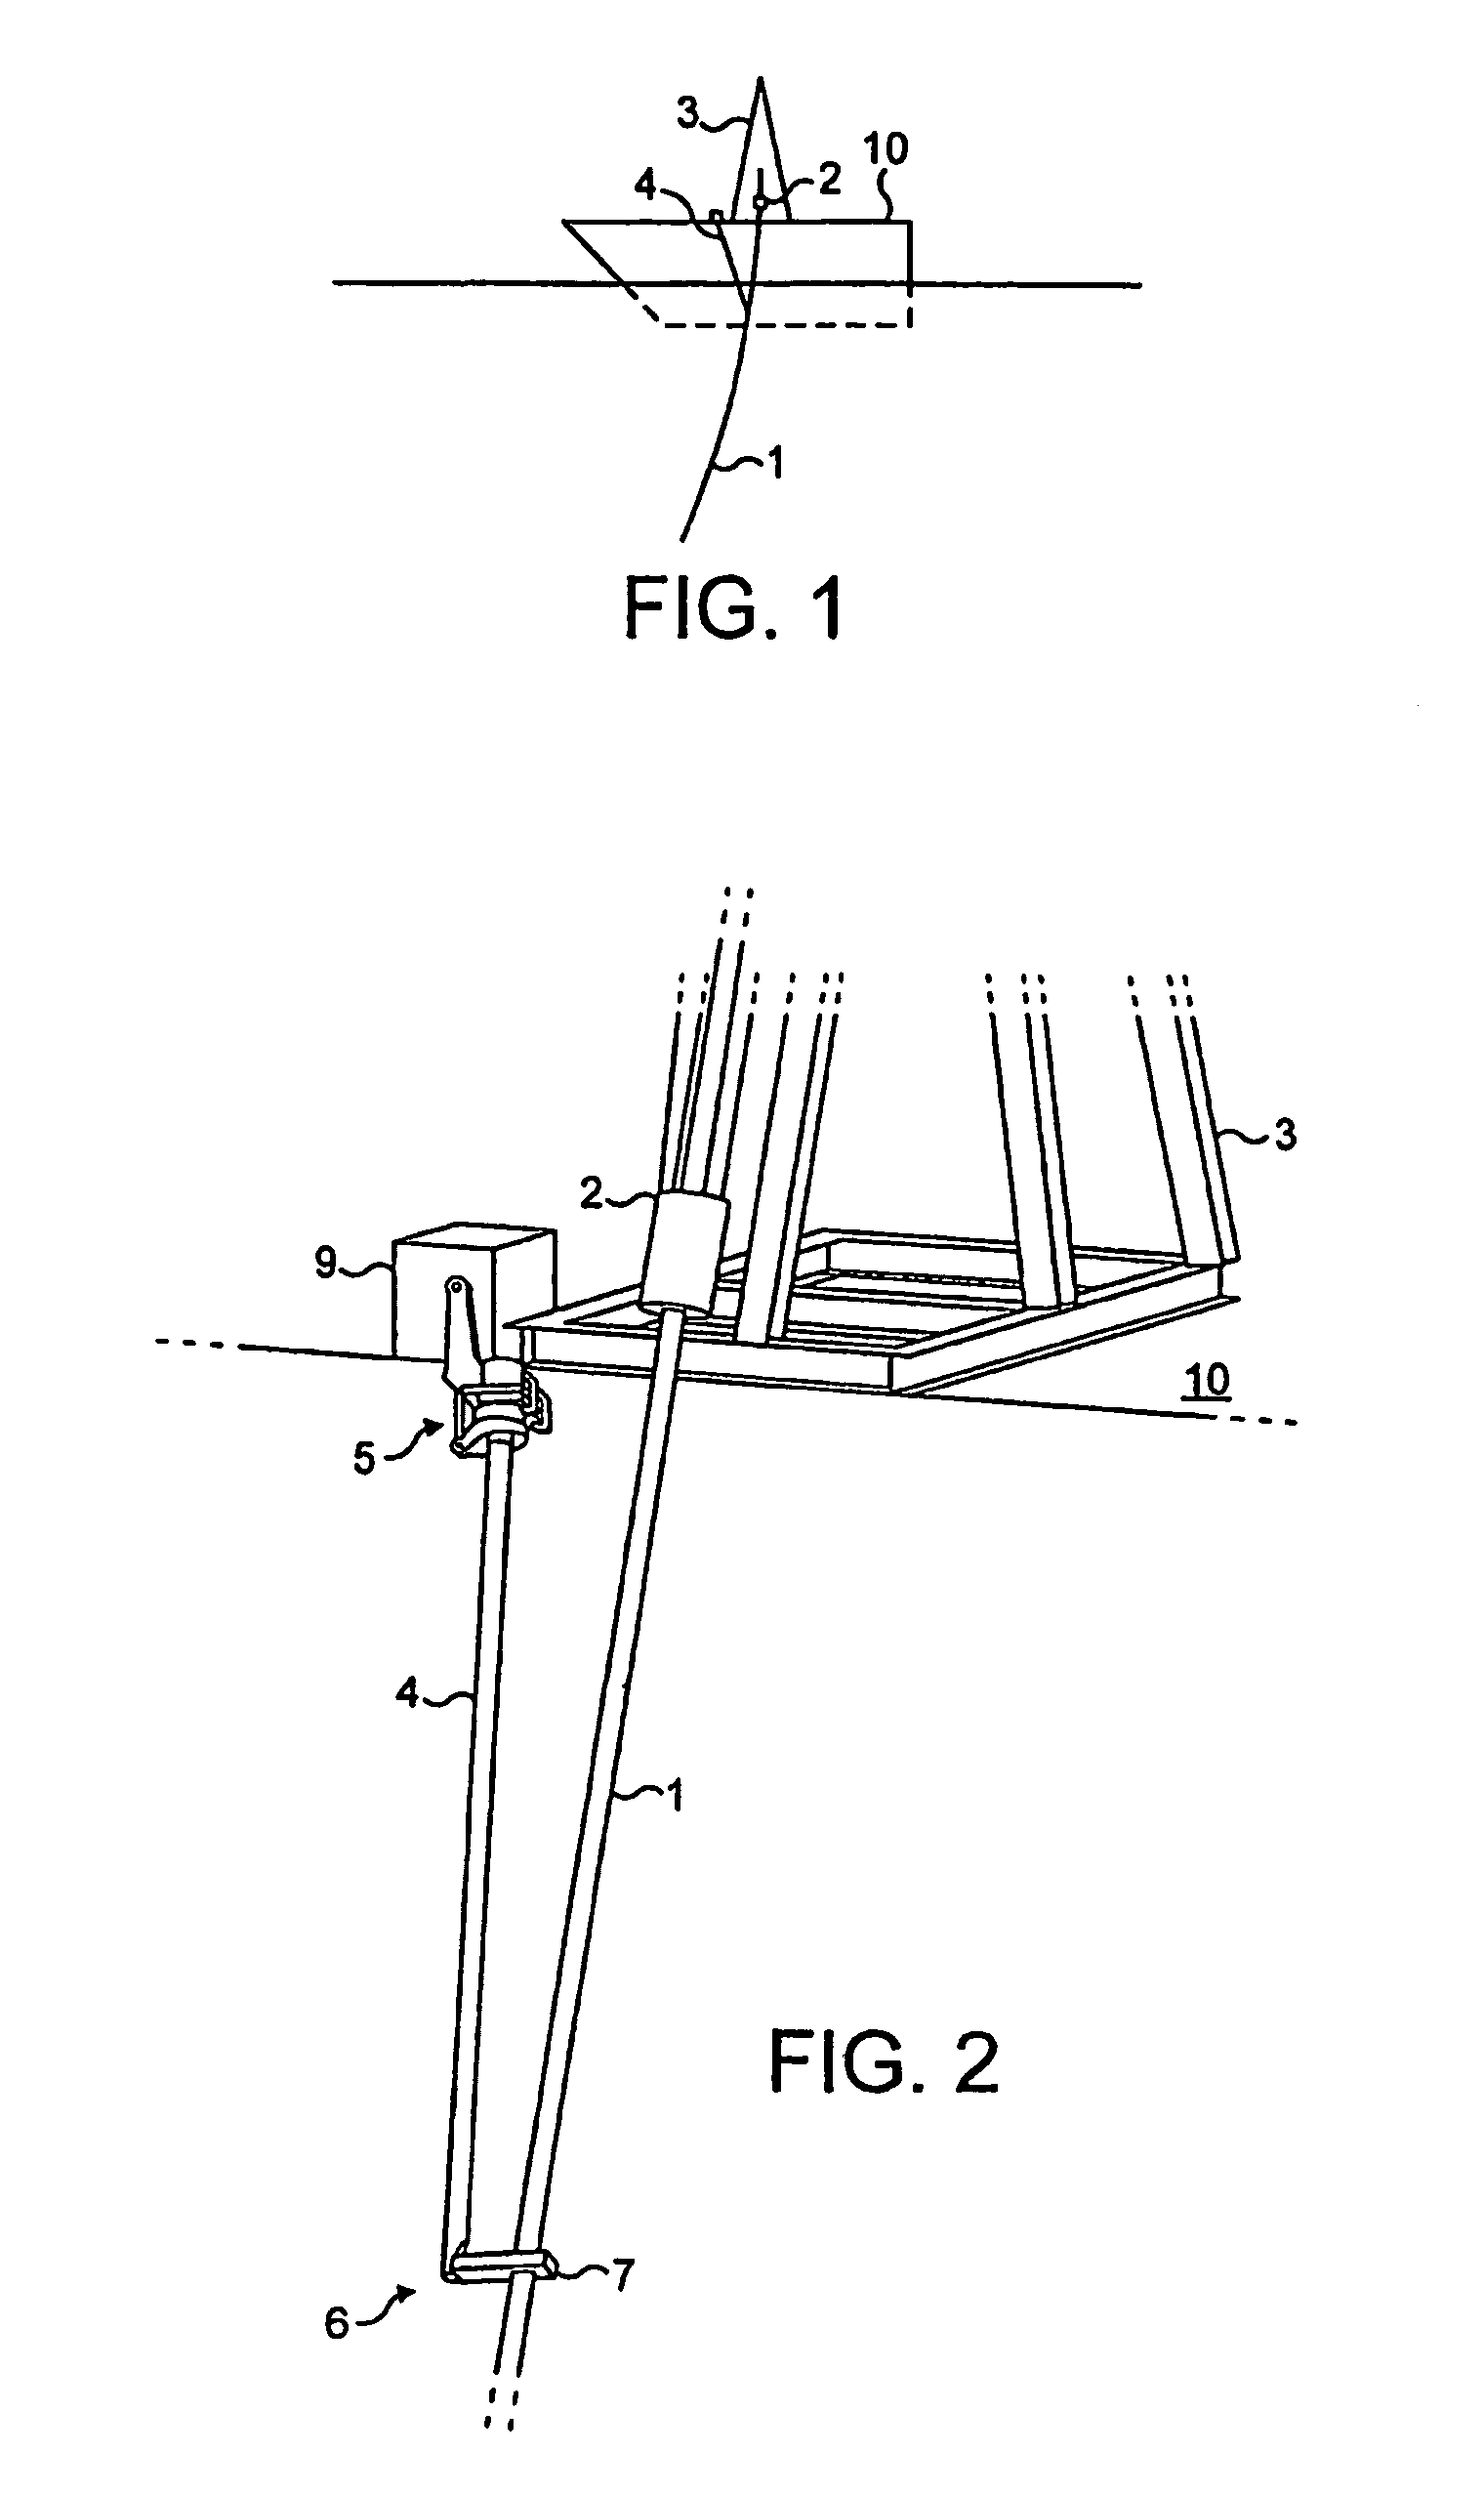 Apparatus and method for use in laying or recovering offshore pipelines or cables